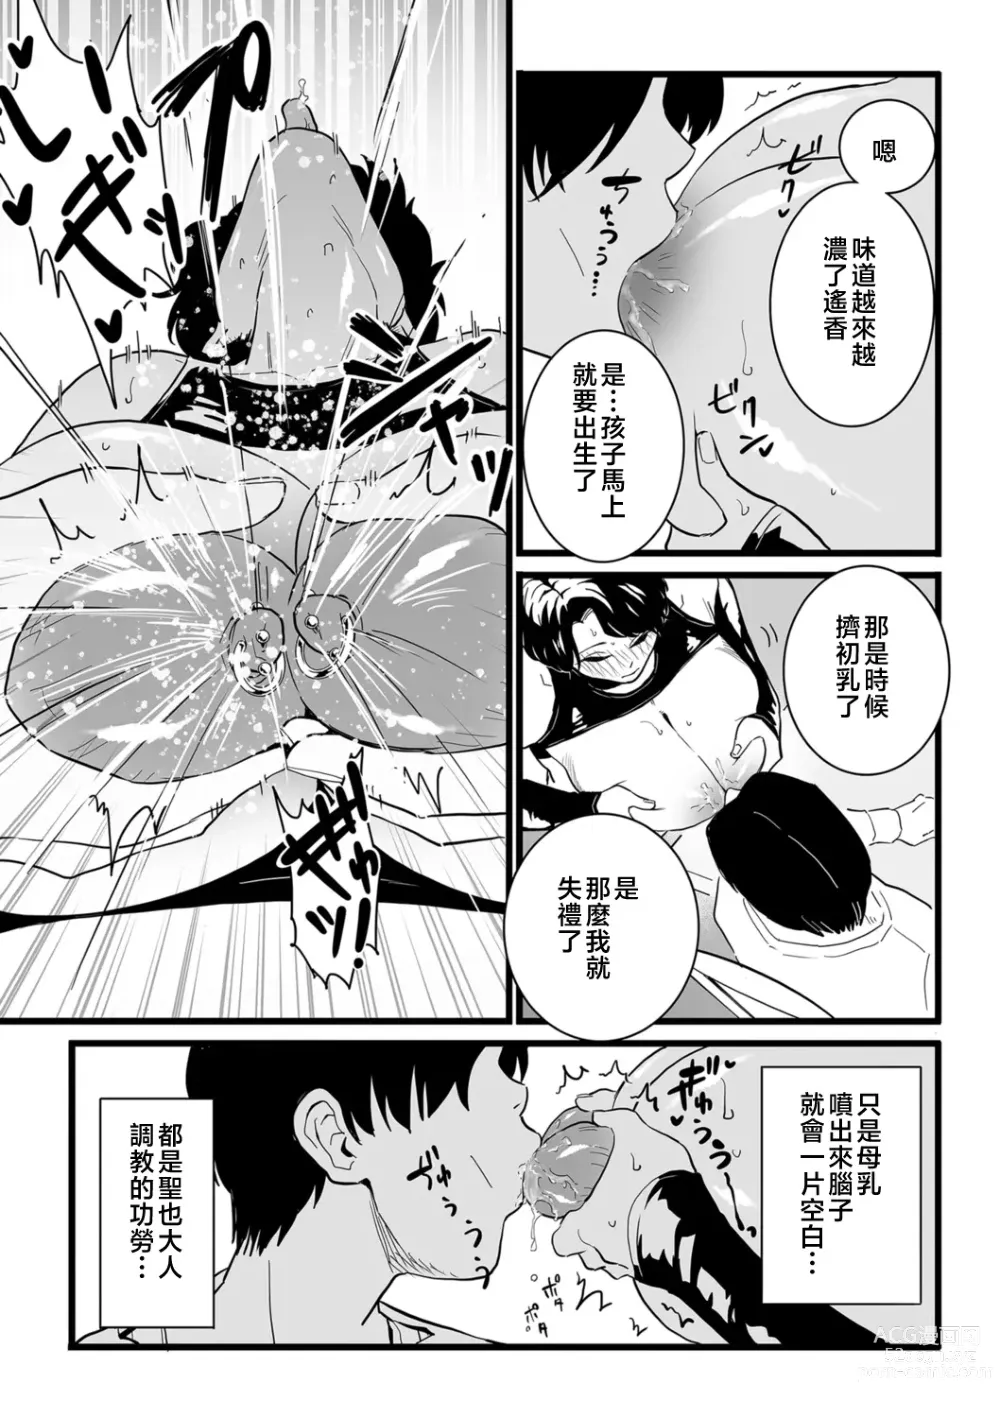 Page 200 of manga Mesu Dorei Sengen - A chain of nightmares, Six heroines become ME DOREI in front of a big, strong cxxk...?